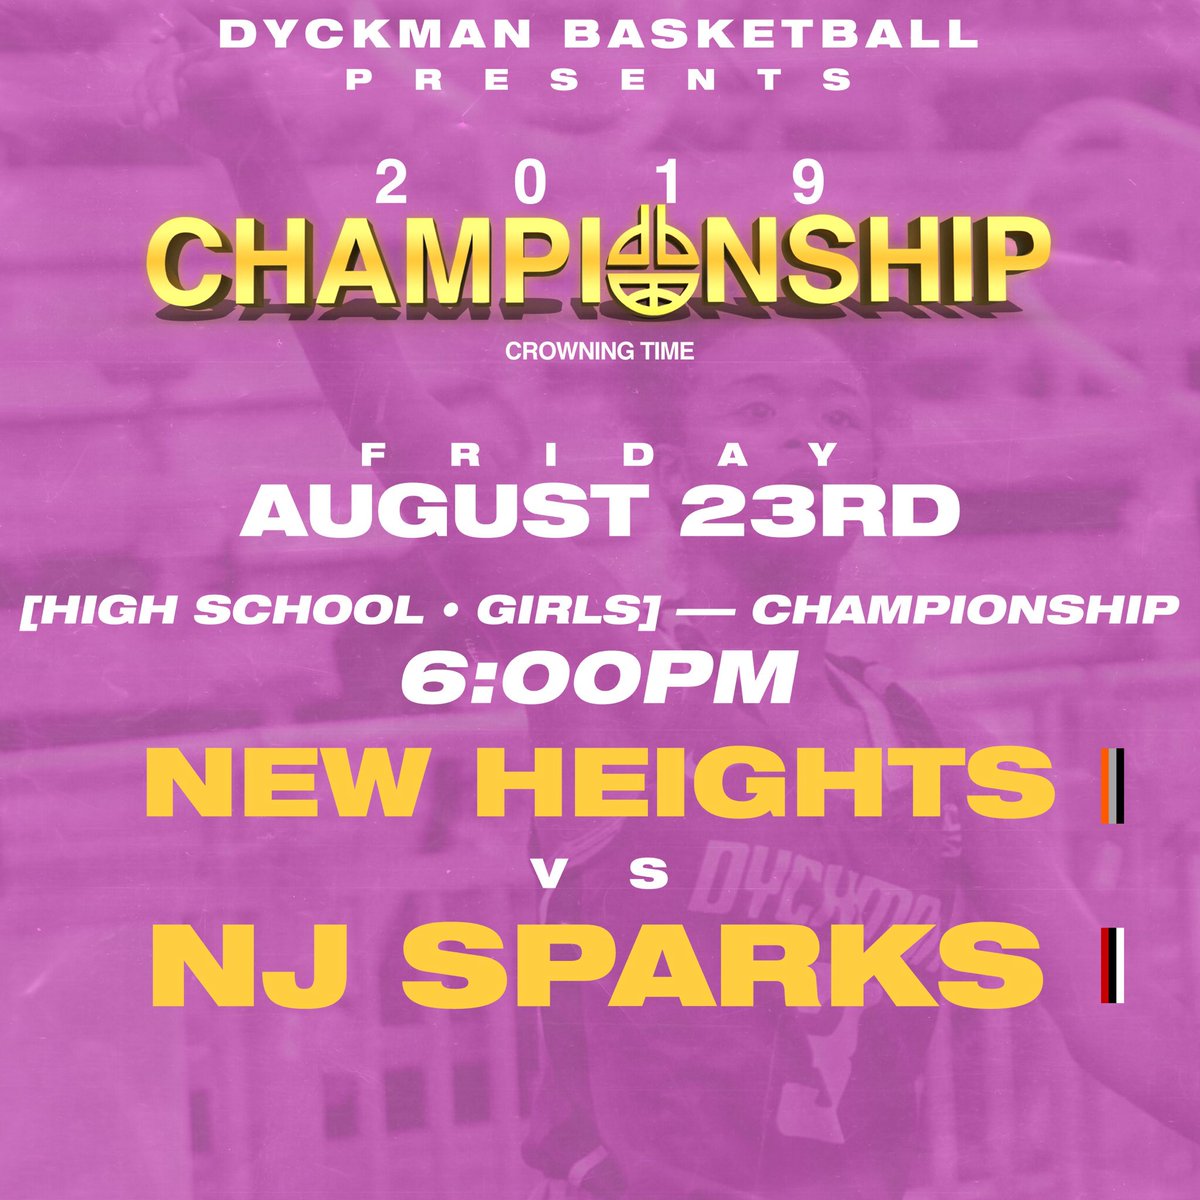 Pop Out At Your Party I’m With The Gang @NYCHoops @NYGHoops @BBallWallSt @scgirlshoops @GthingBBall #LadyBallers